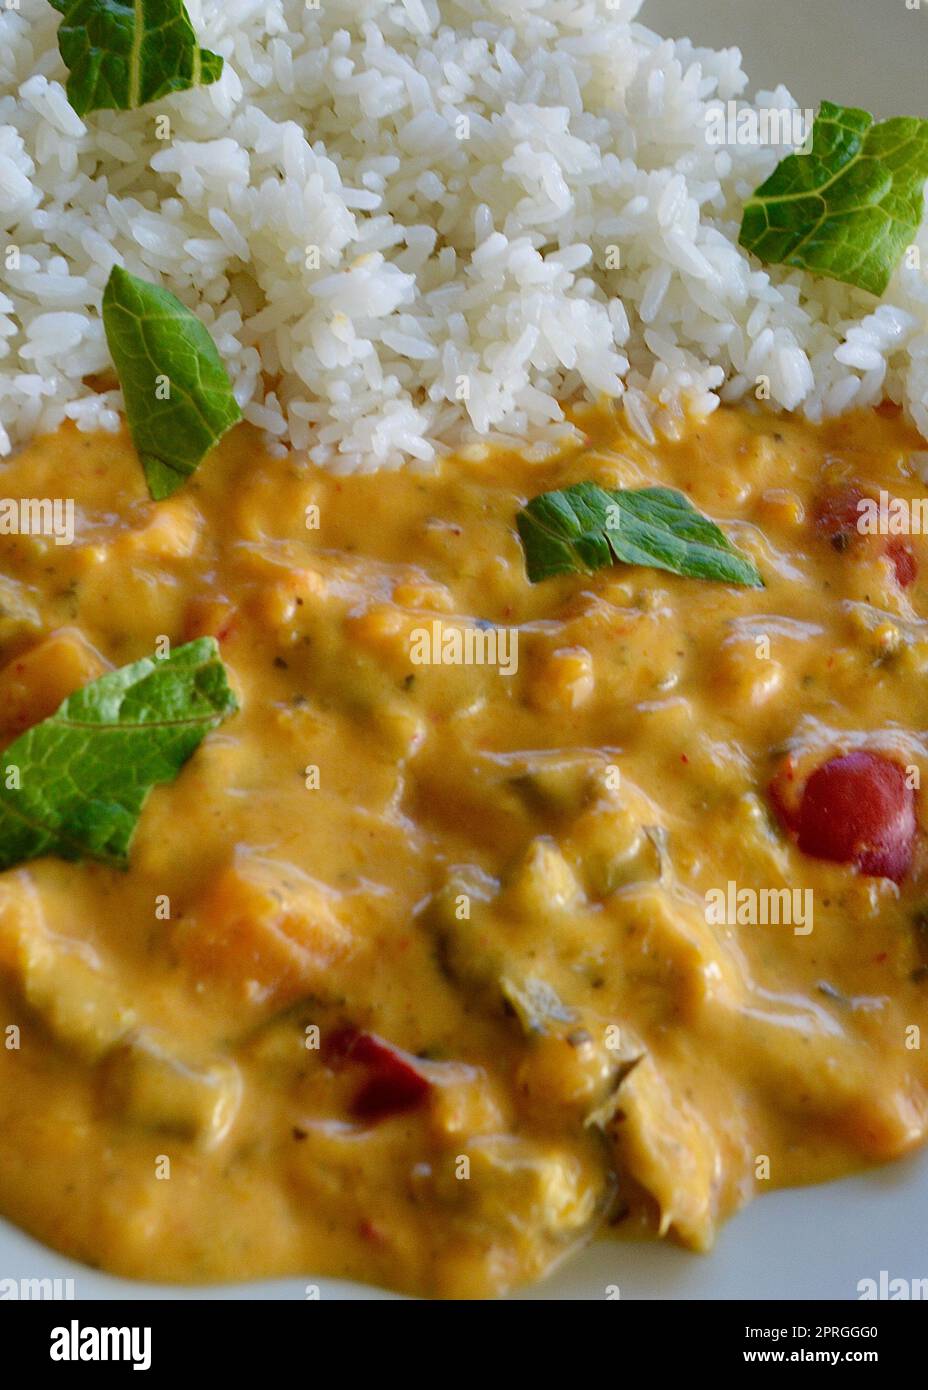 Thai red vegetable curry and rice Stock Photo